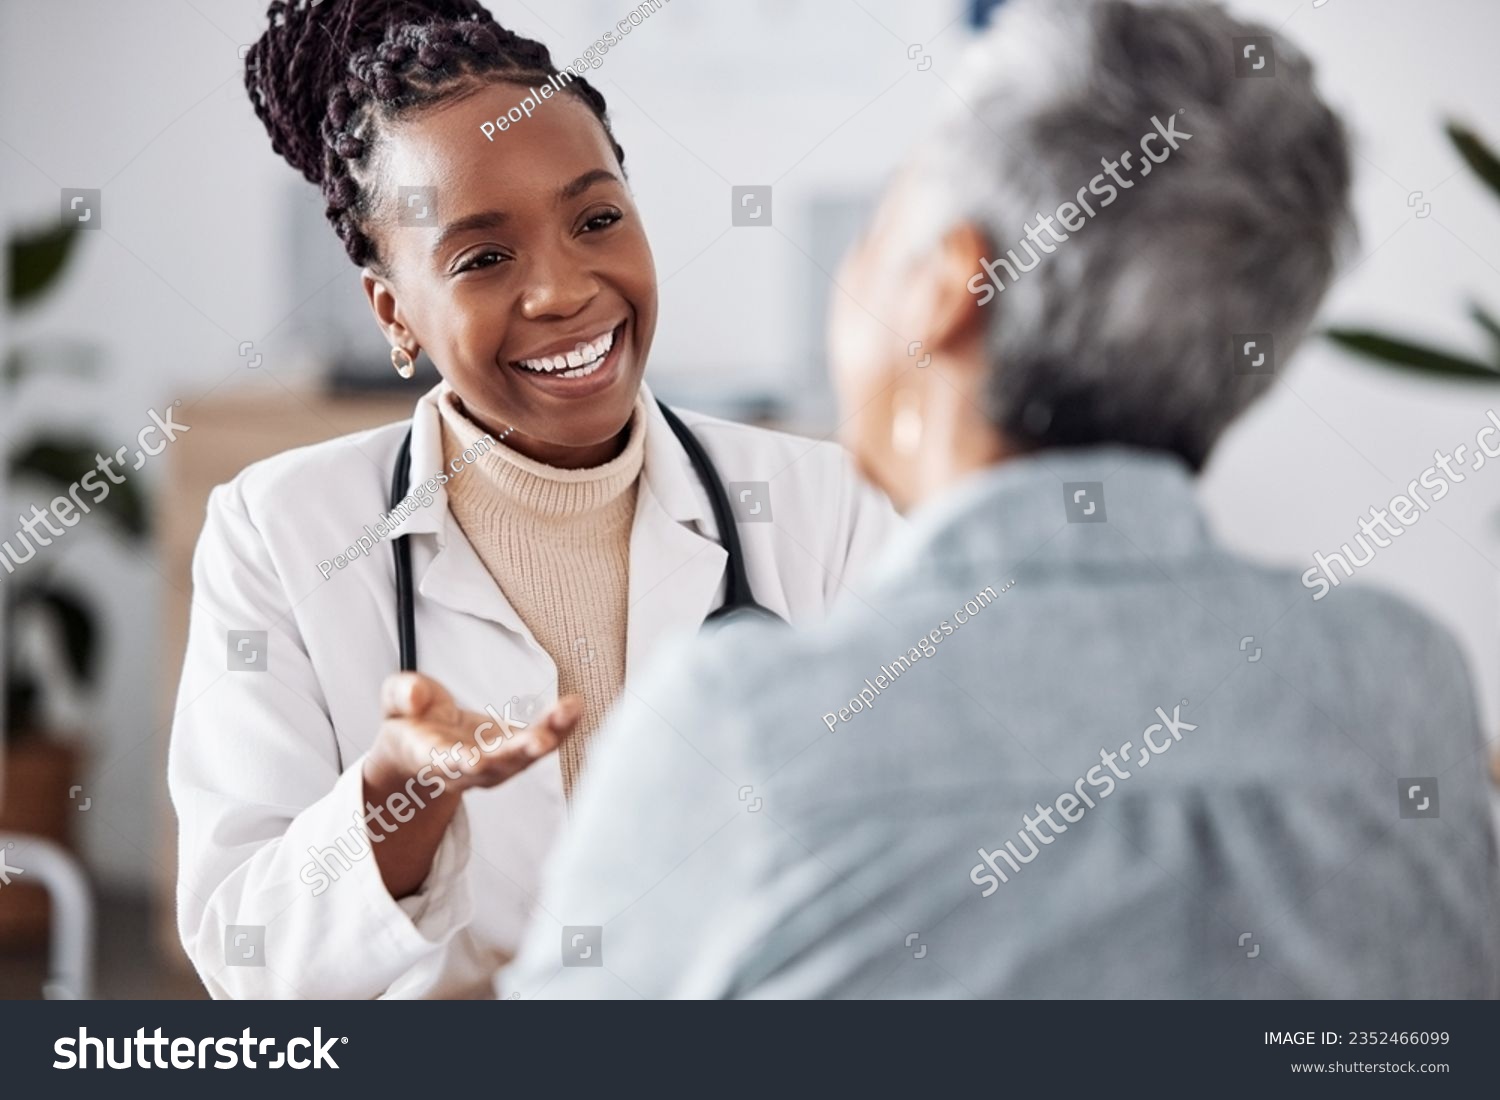 Smile, black woman or doctor consulting a patient in meeting in hospital for healthcare feedback or support. Happy, medical or nurse with a mature person talking or speaking of test results or advice #2352466099